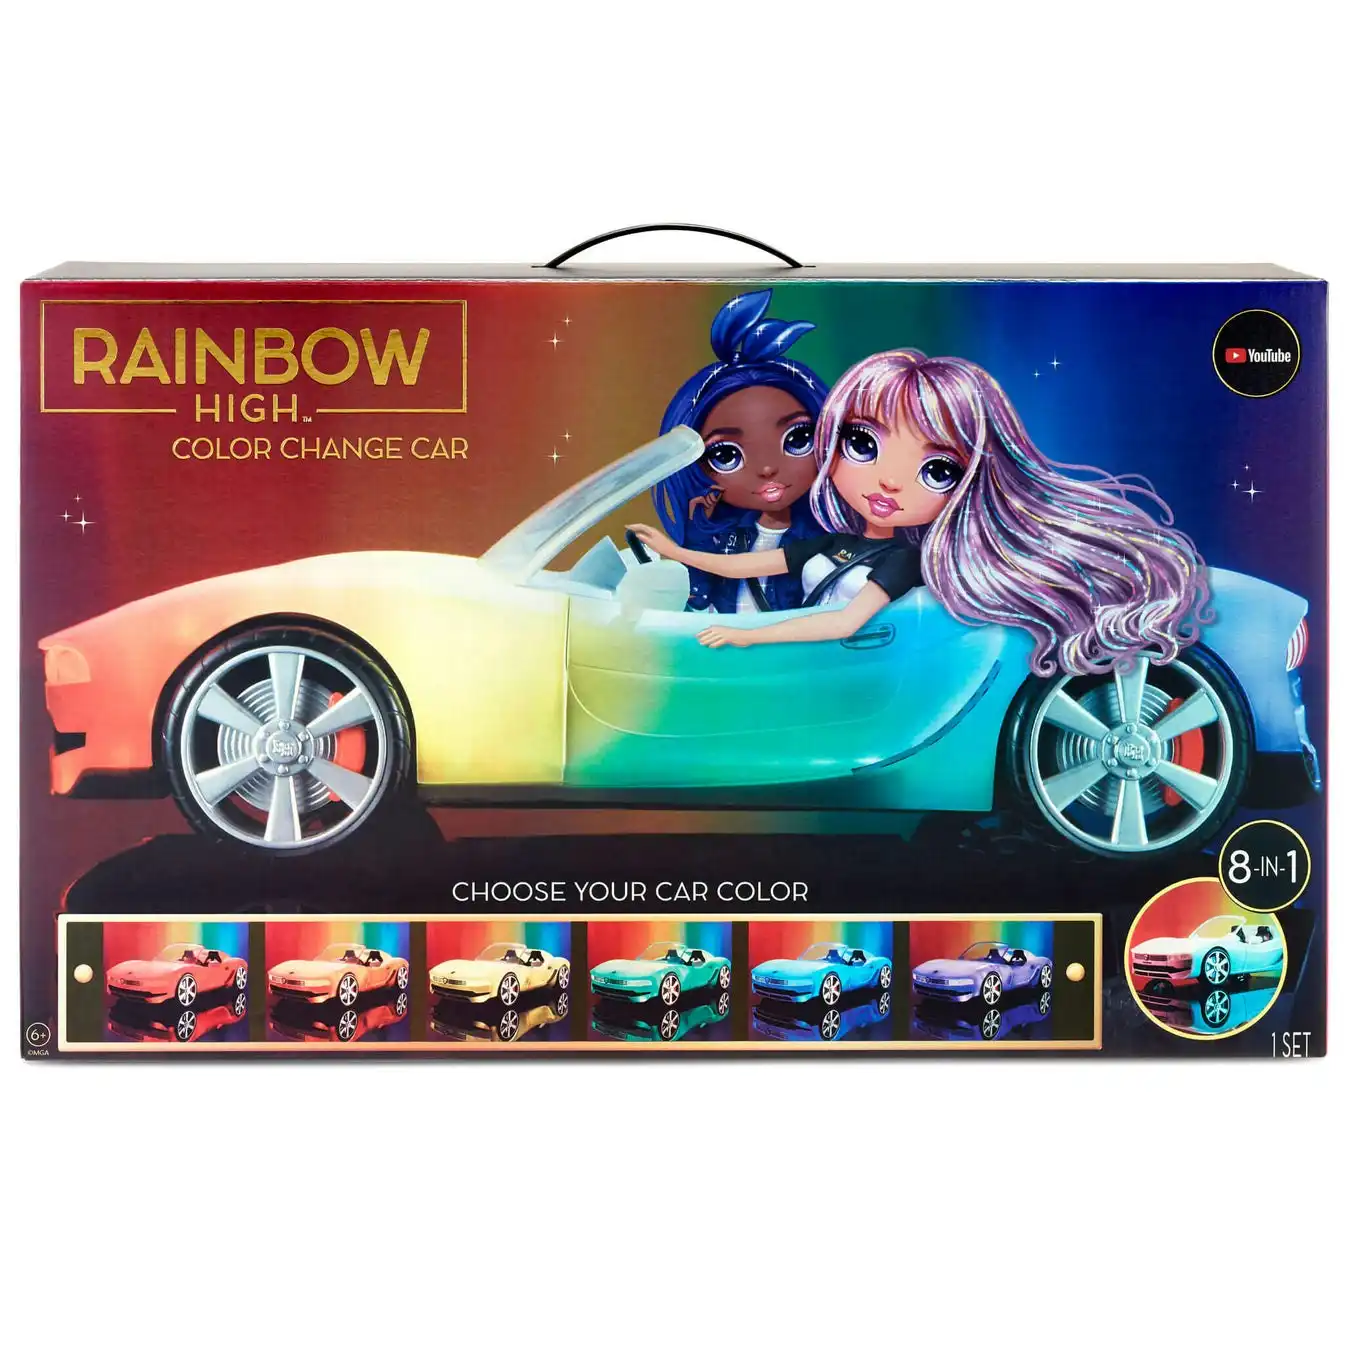 Rainbow High - Convertible Color Change Car